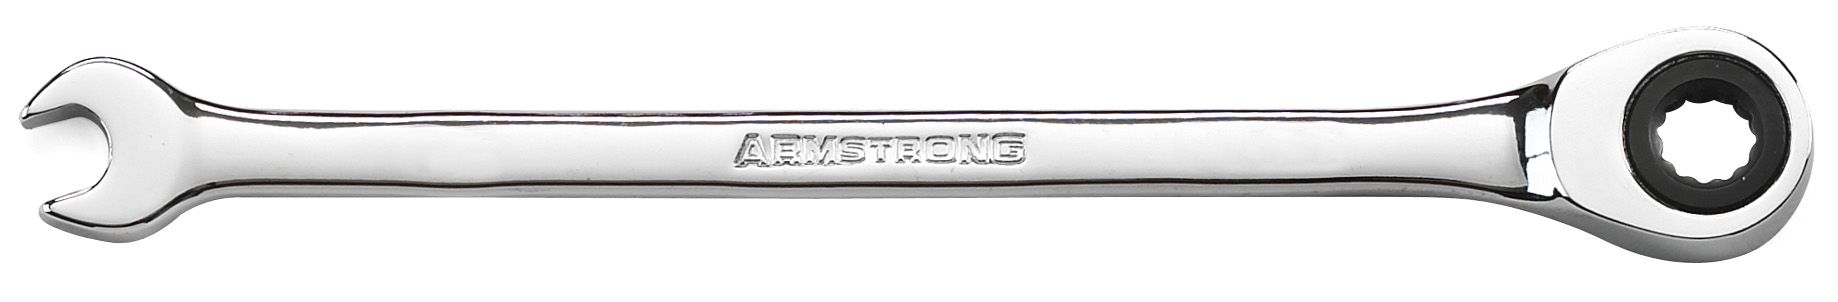 Armstrong 11 mm 12 pt. Long Combination Ratcheting Wrench Metric